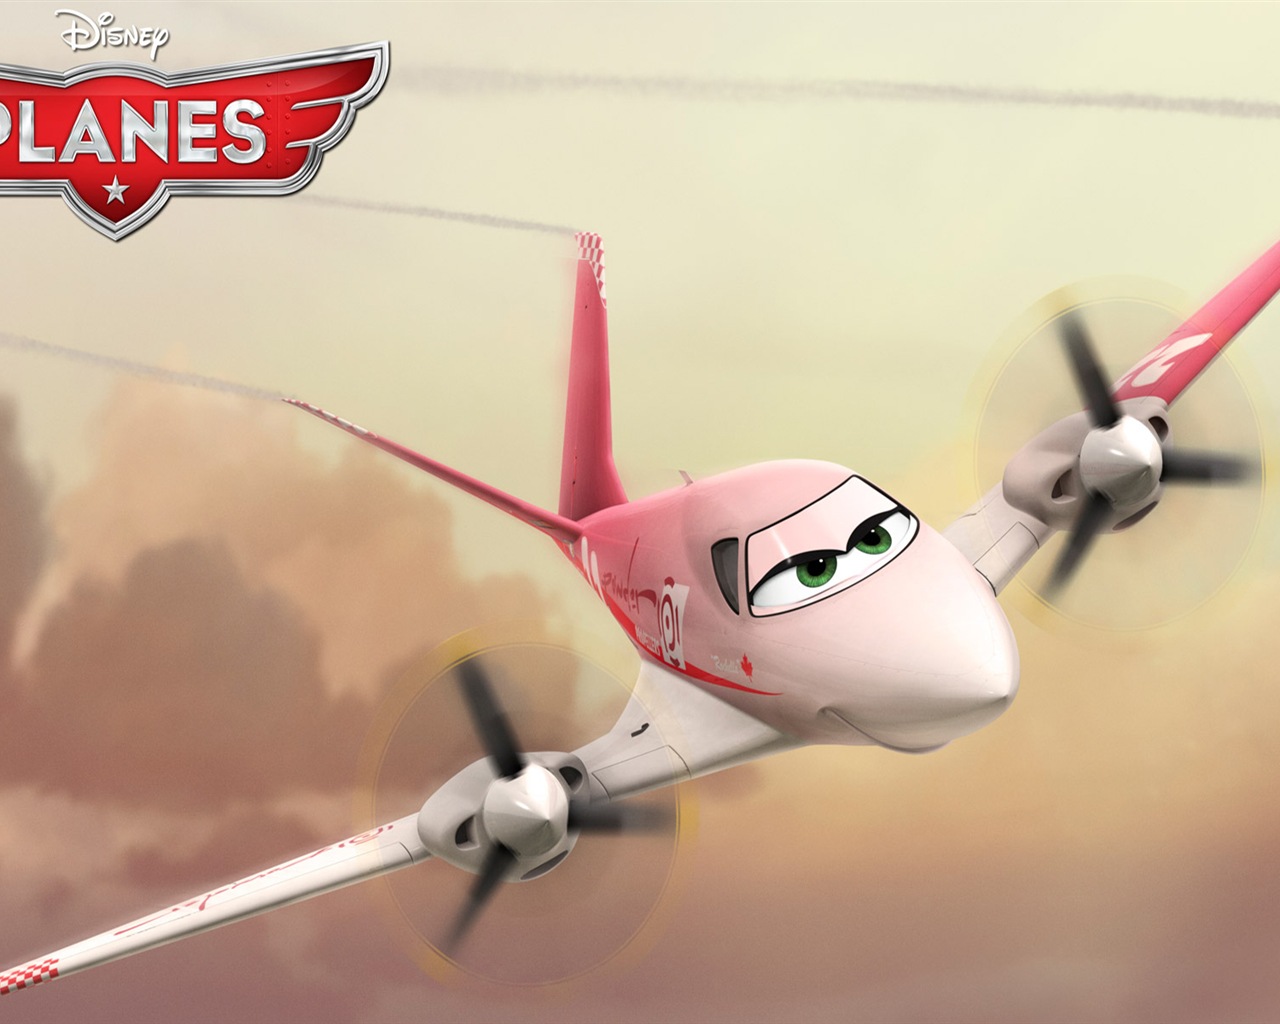 Planes 2013 HD wallpapers #12 - 1280x1024